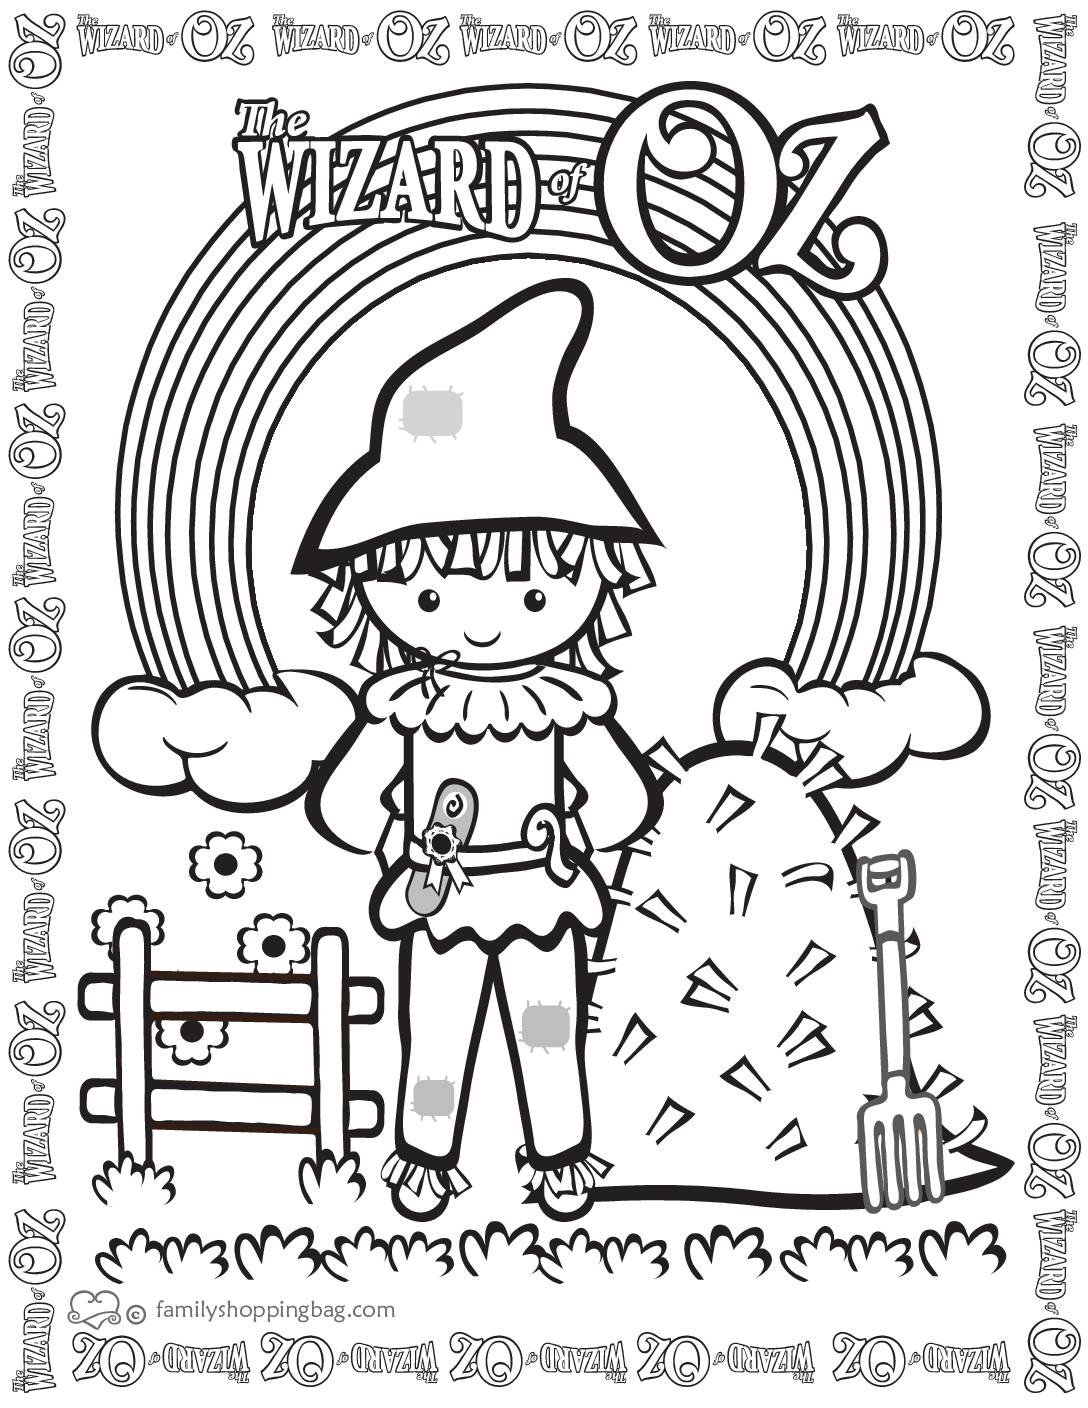 Coloring Page 8 Wizard of Oz Coloring Pages